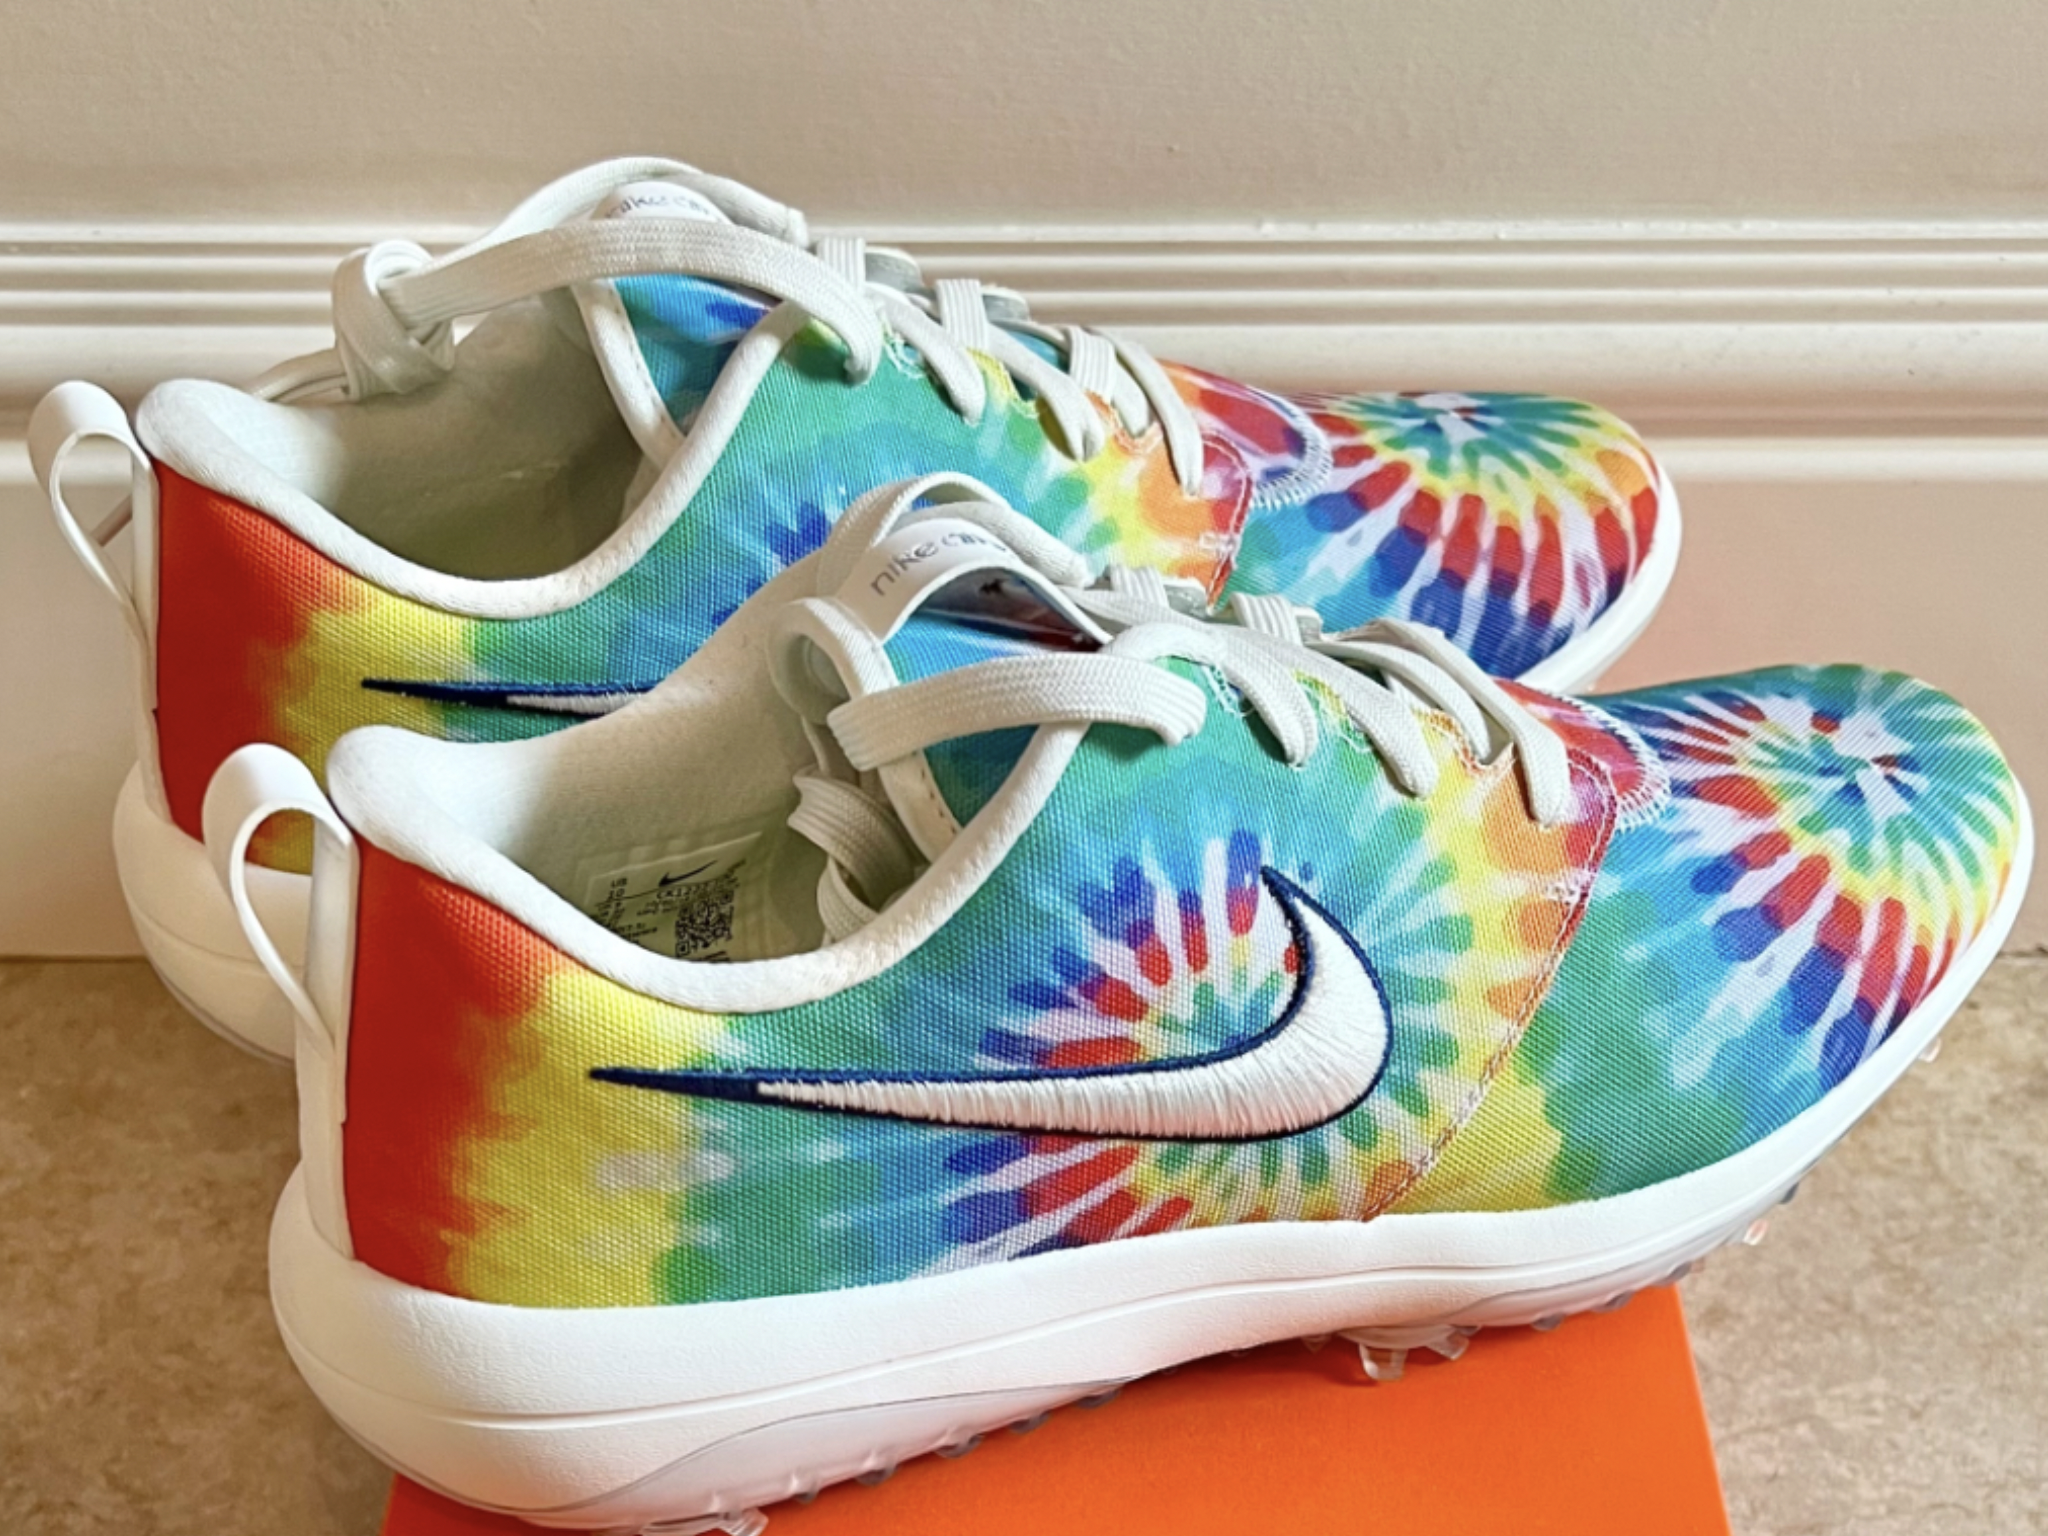 Laboratorium Geduld flexibel Coolest thing for sale in the GolfWRX Classifieds (5/3/22): Nike Roshe G  Tour NRG 'Peace, Love and Golf' Tie Dye's – GolfWRX